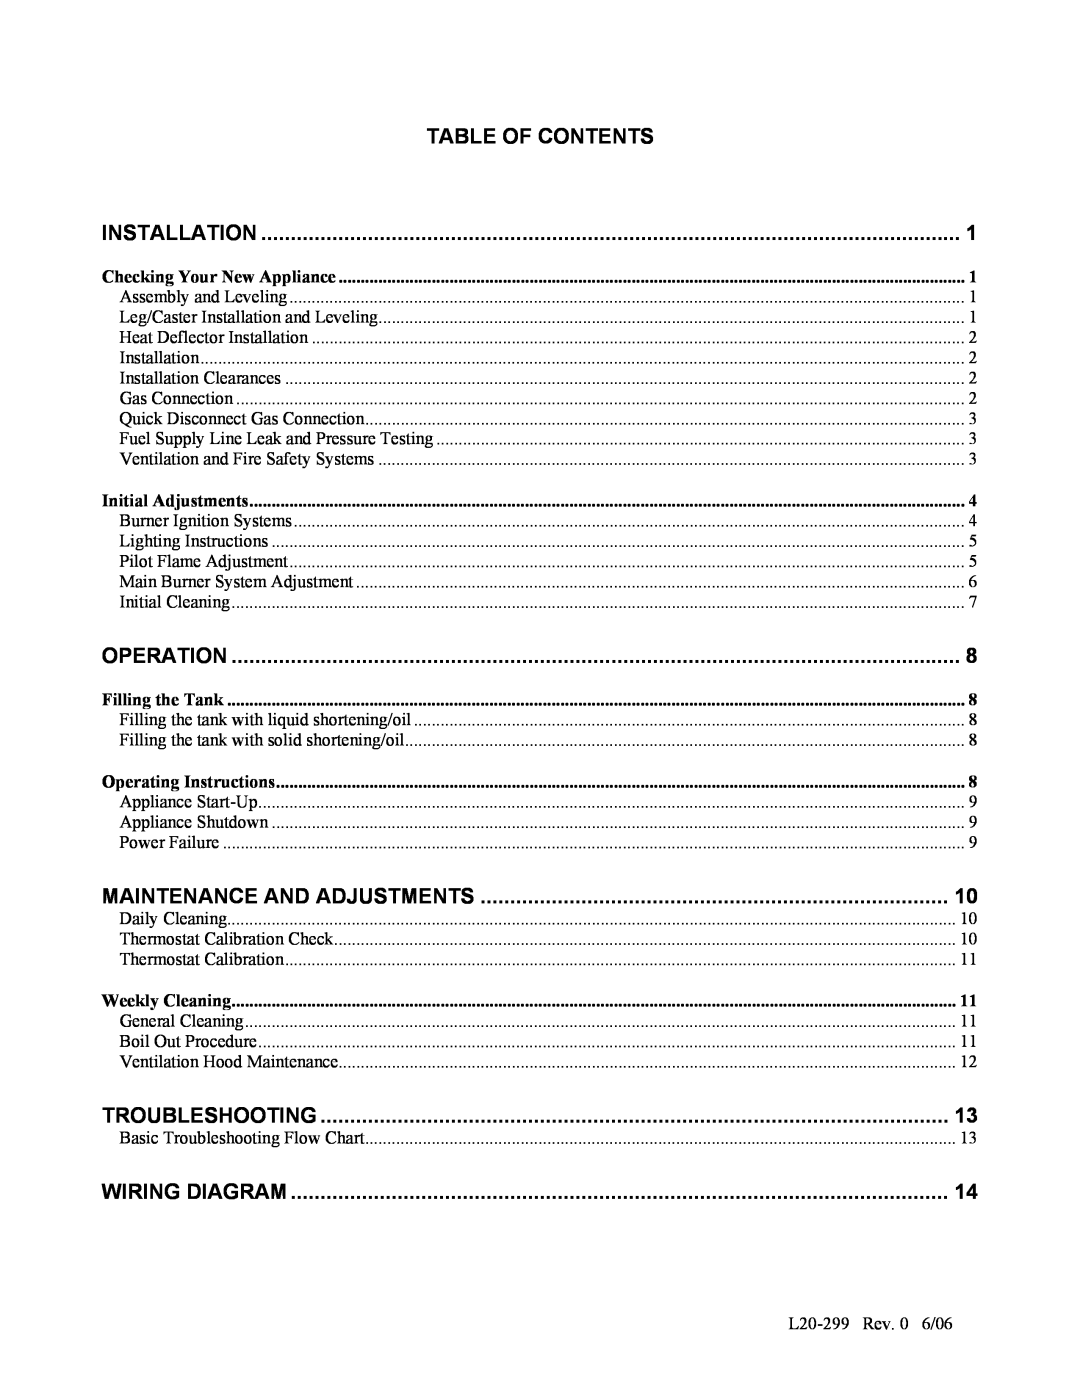 Pitco Frialator L20-299 operation manual Table Of Contents 